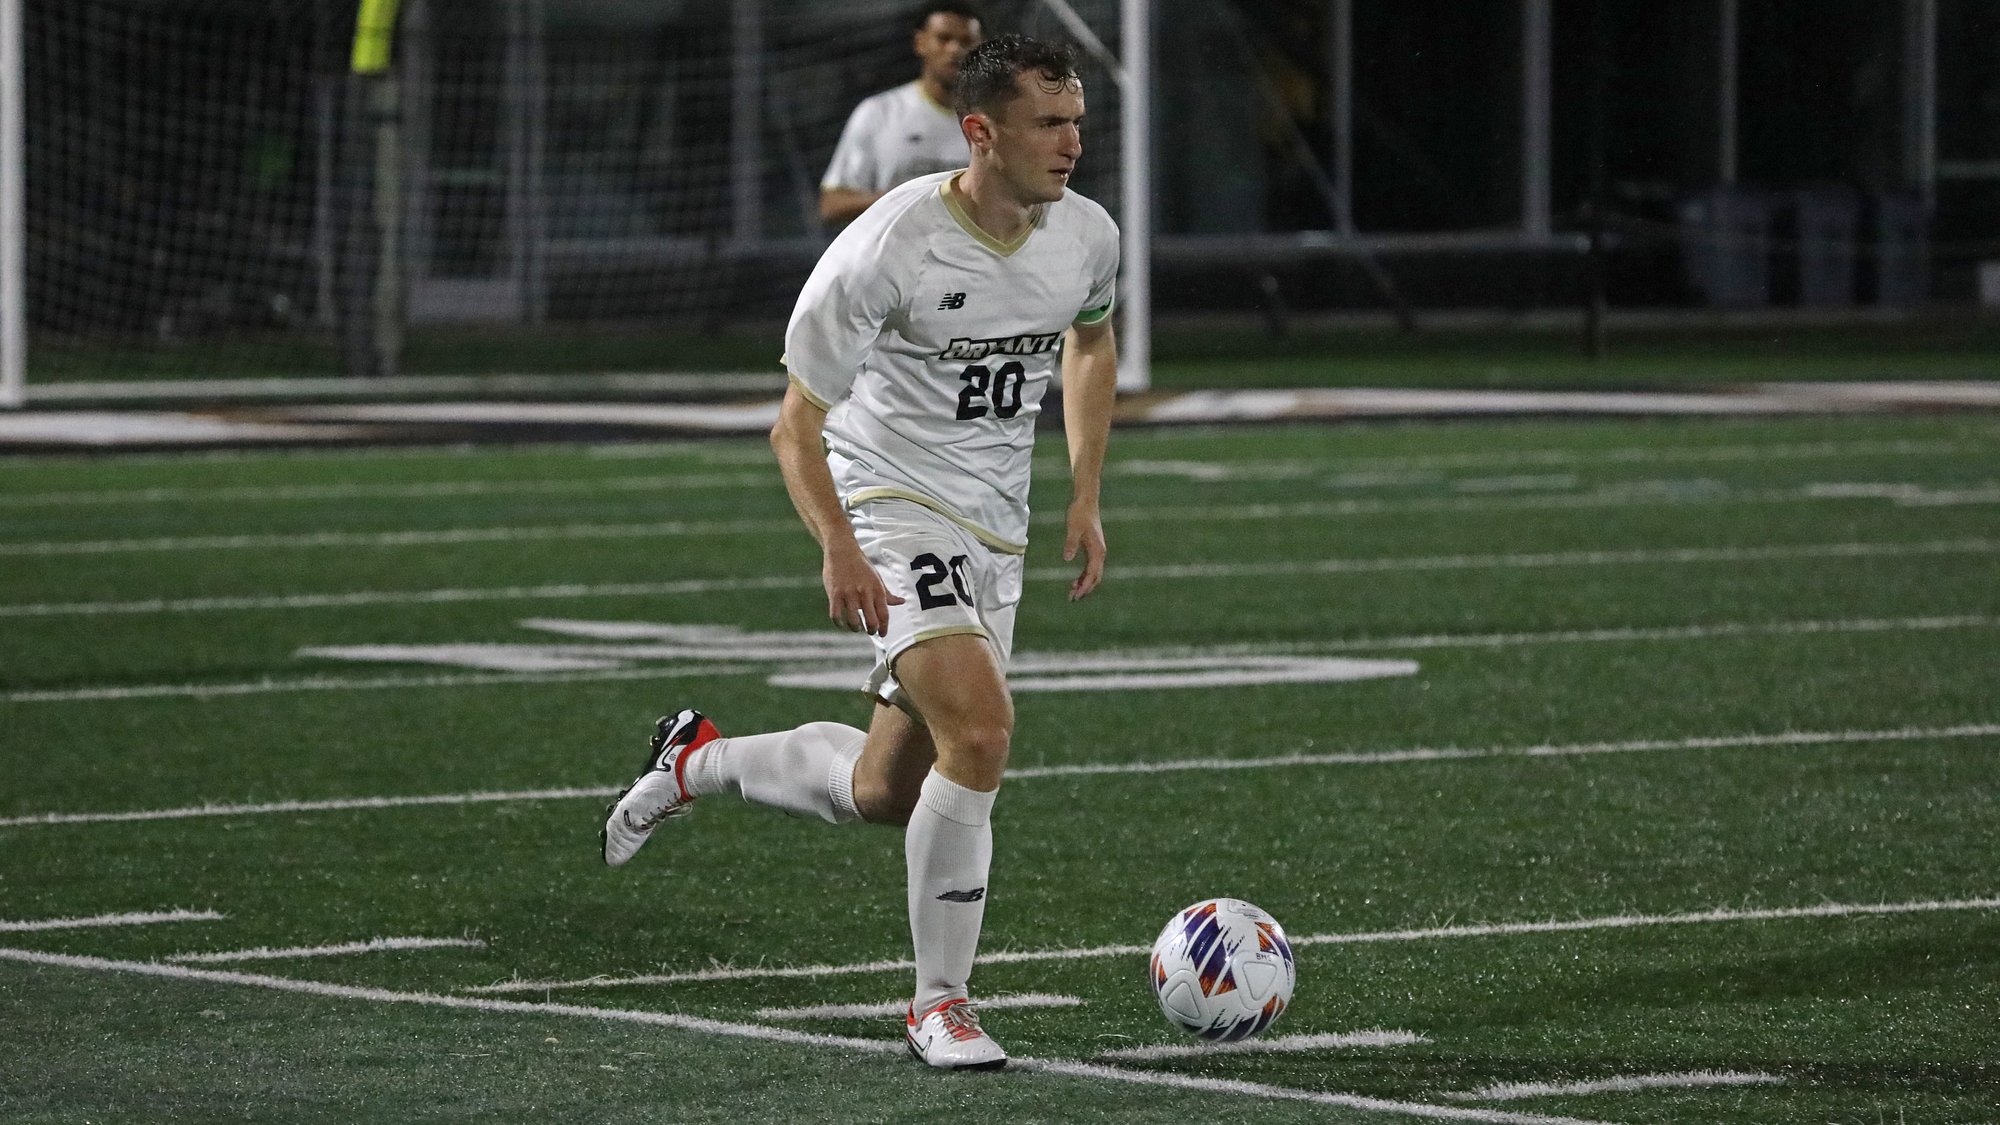 Ablanedo named to CSC Academic All-District Team